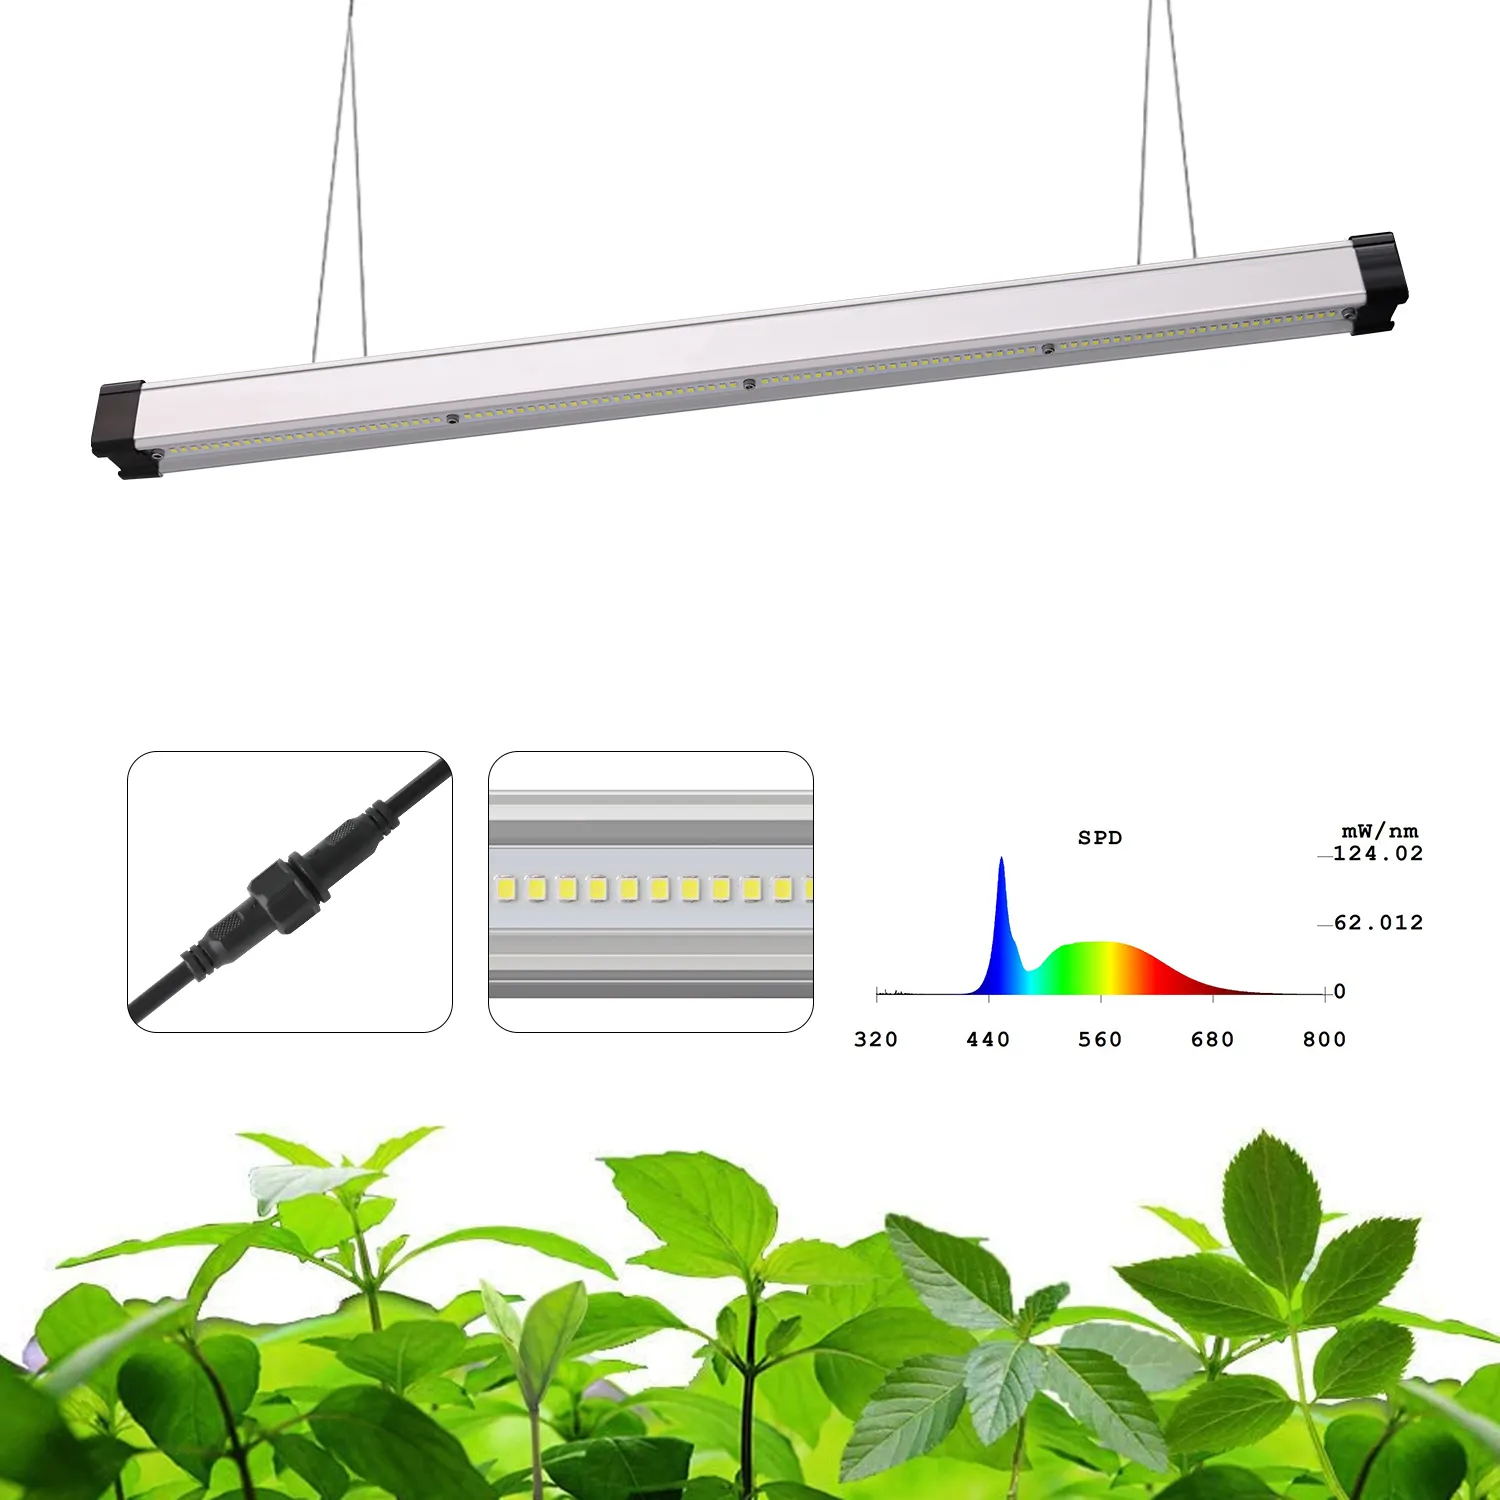 Waterproof Portable Led Grow Light Bar With Full Spectrum Daisy Chain Plant Bulb Light For Indoor Growing